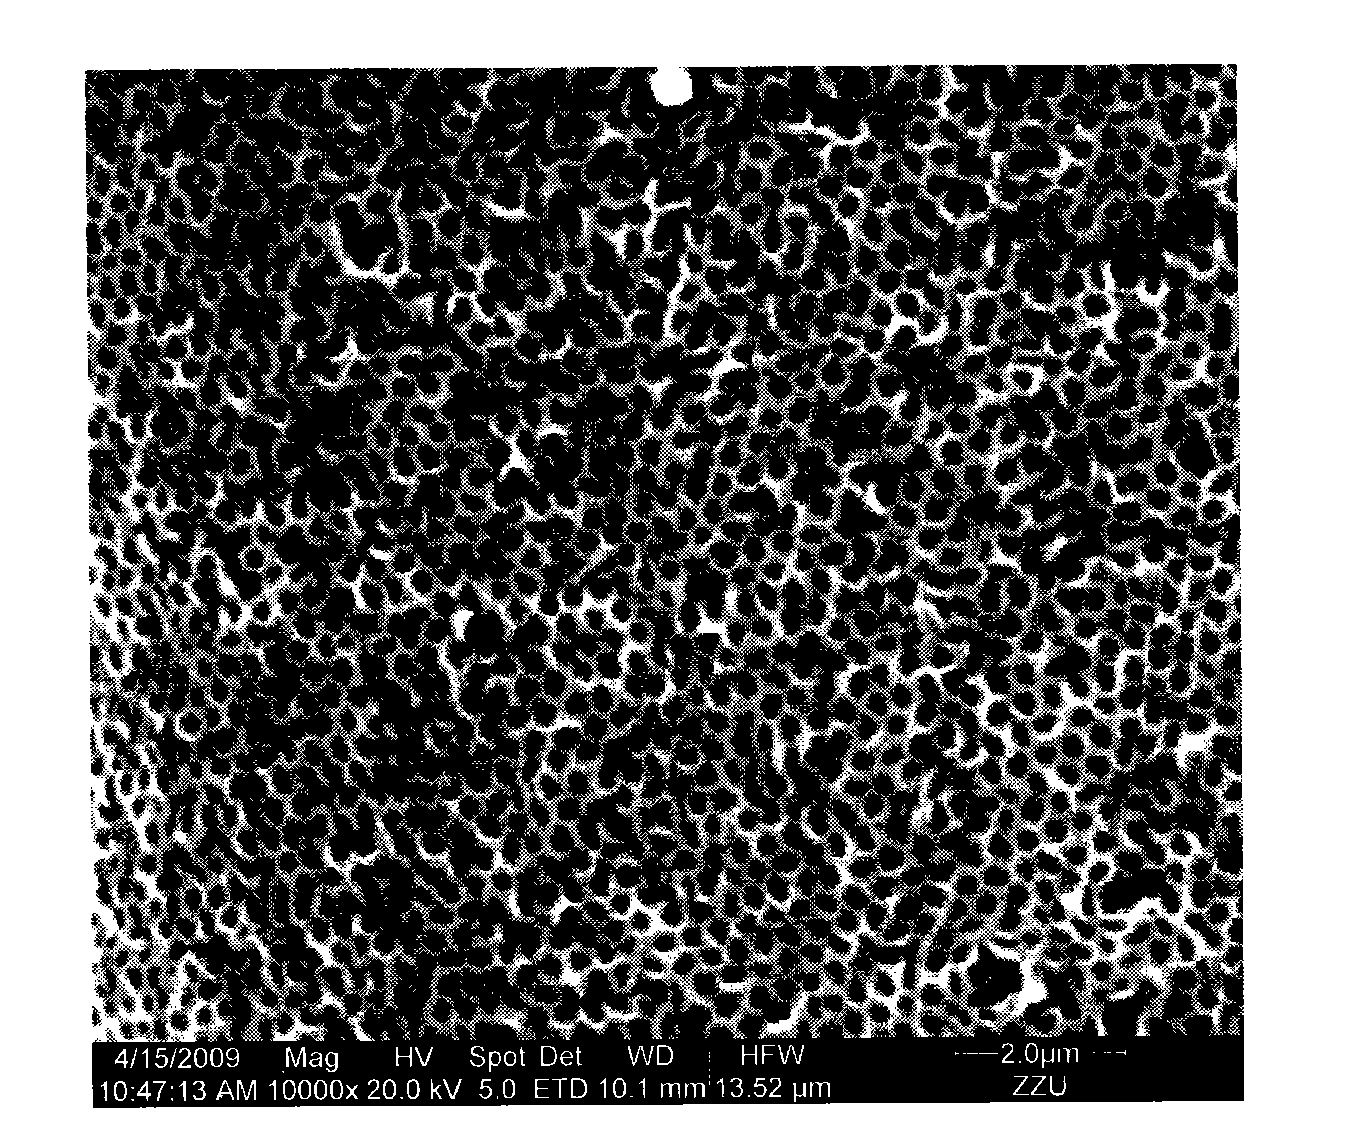 Method for self assembling non-spherical polystyrene grains to form into multihole and ordered structure